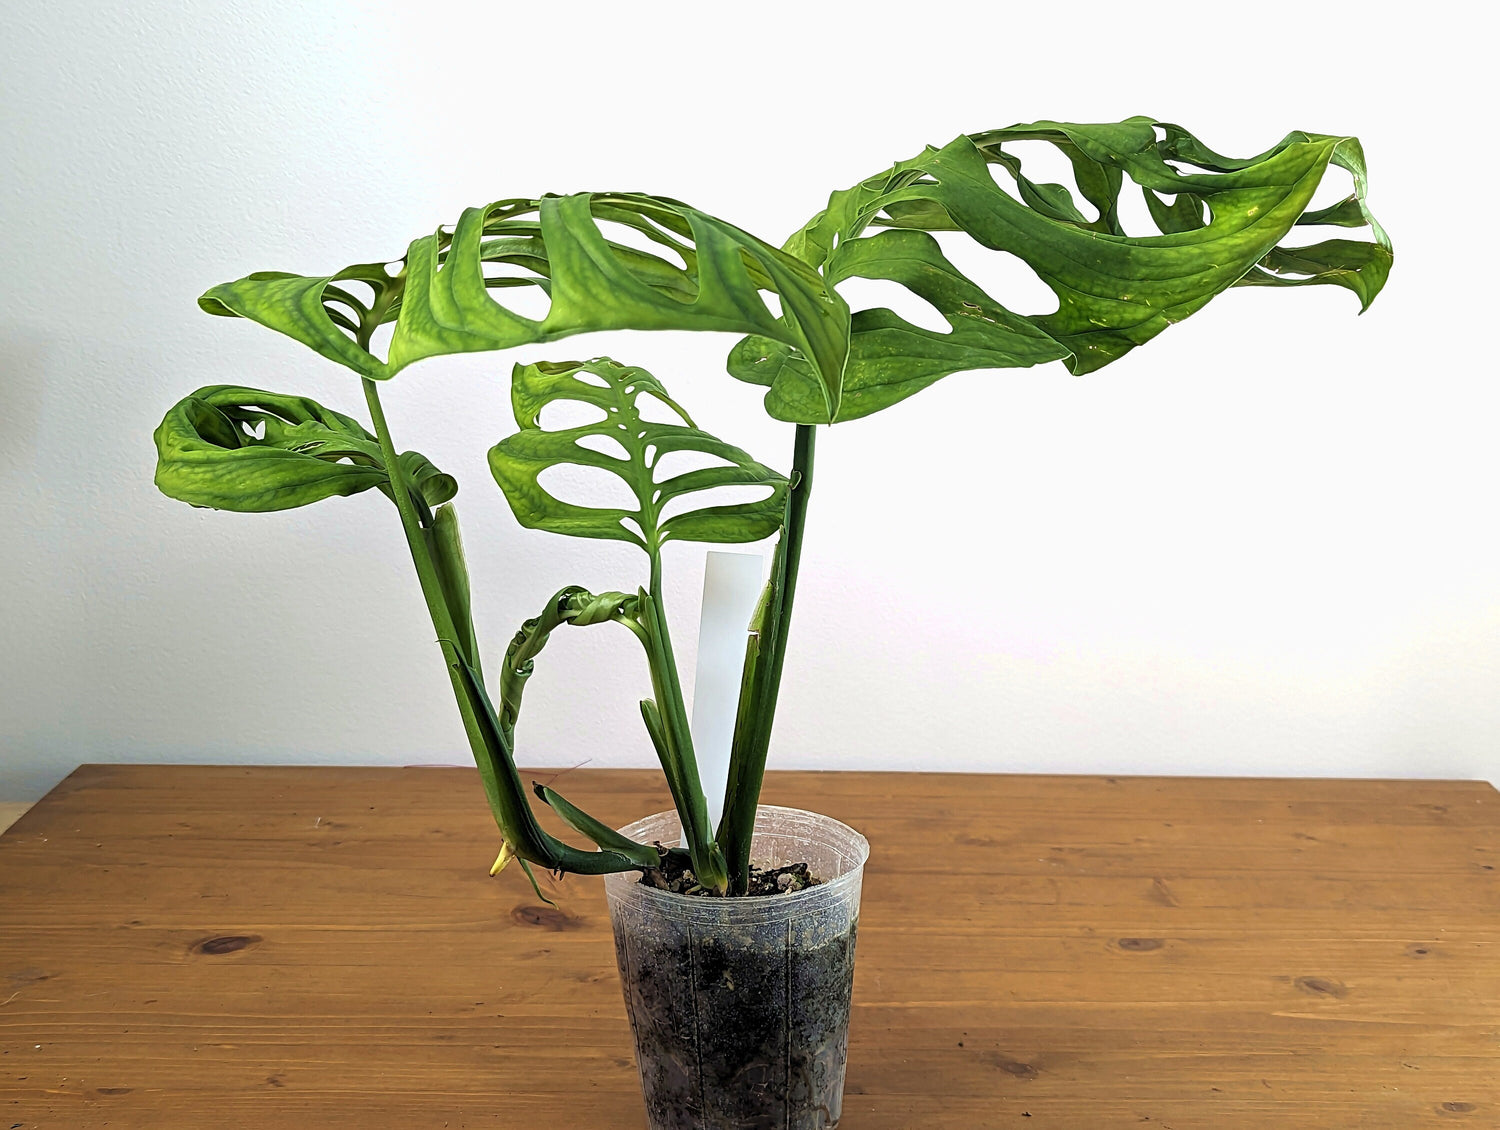 Monstera Esqueleto Large Fully Rooted with Vine - Exact Plant - 4 Inch Pot